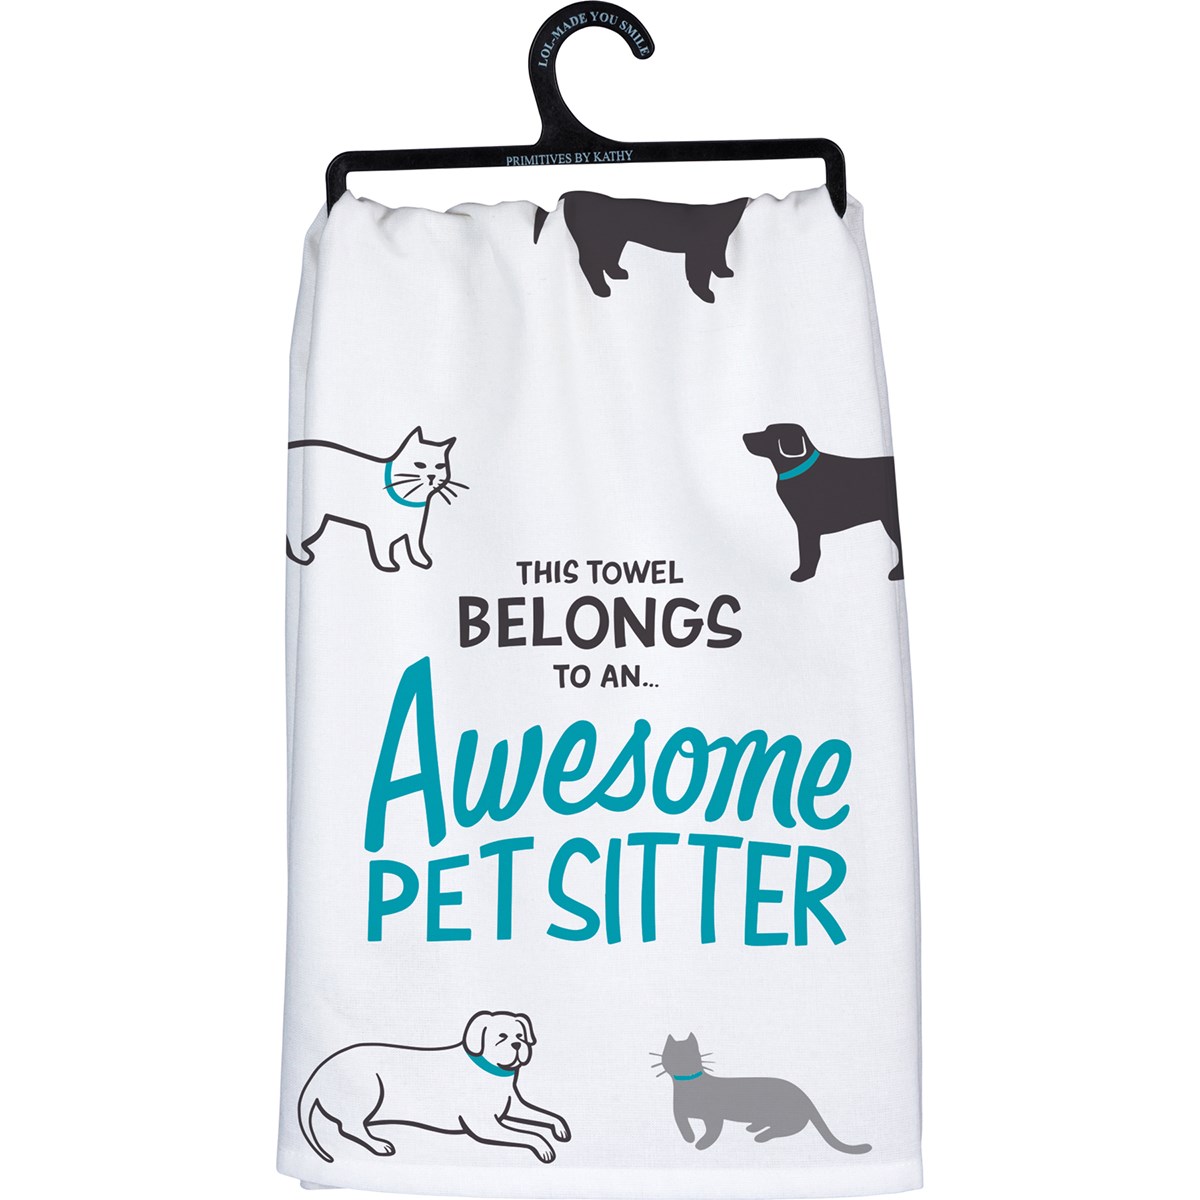 Kitchen Towel - Awesome Pet Sitter - 28" x 28" - Cotton